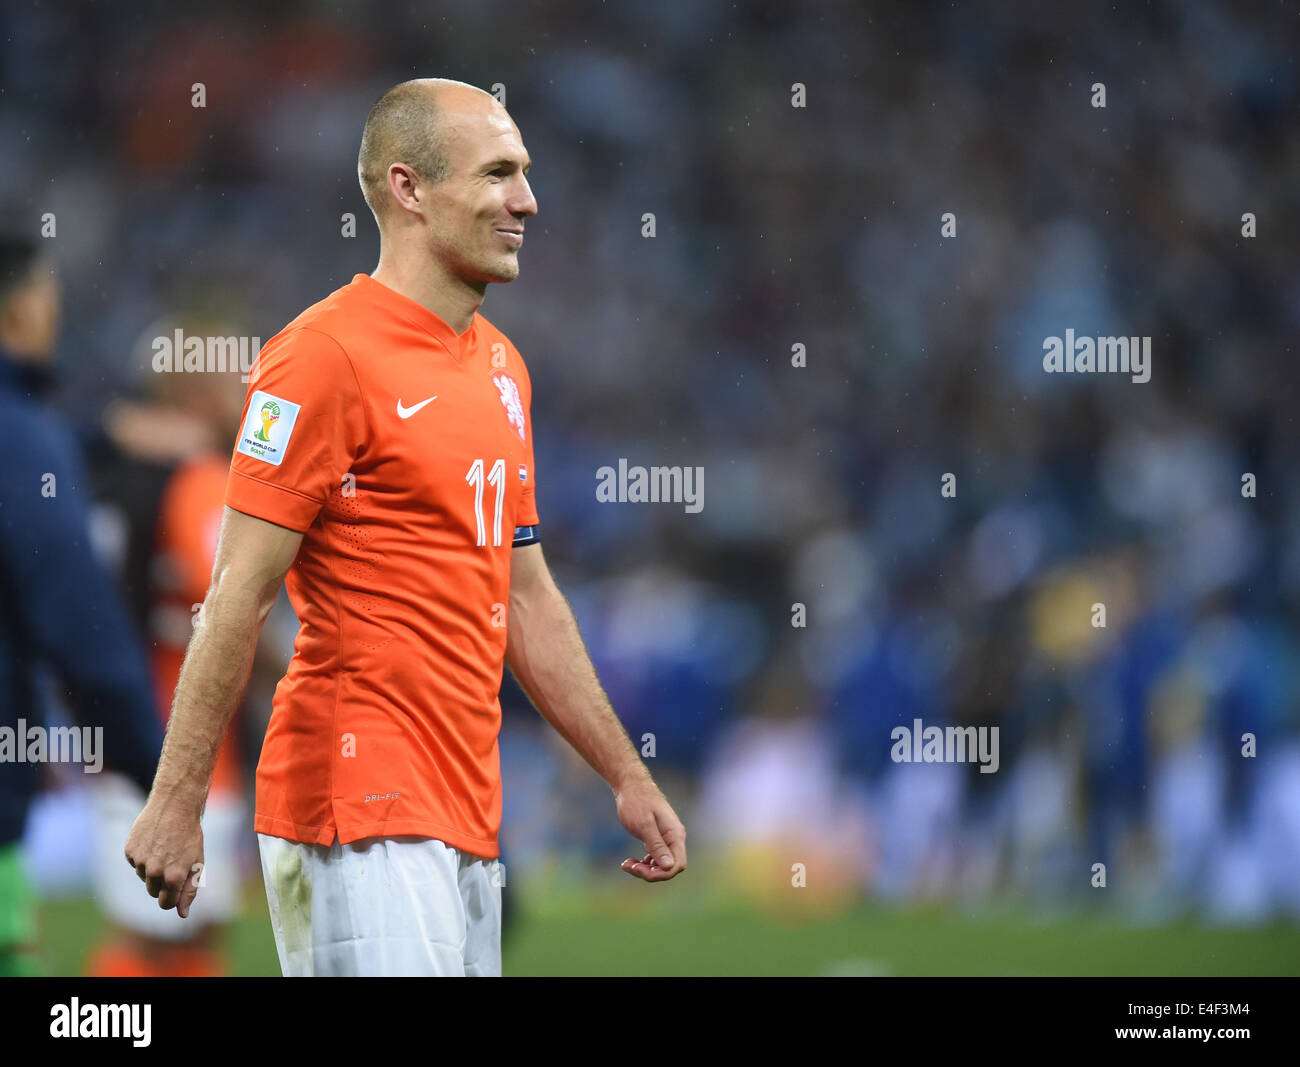 Sao Paulo, Brazil. 09th July, 2014. Arjen Robben reacts after the FIFA World Cup 2014 semi-final soccer match between the Netherlands and Argentina at the Arena Corinthians in Sao Paulo, Brazil, 09 July 2014. Photo: Marius Becker/dpa/Alamy Live News Stock Photo